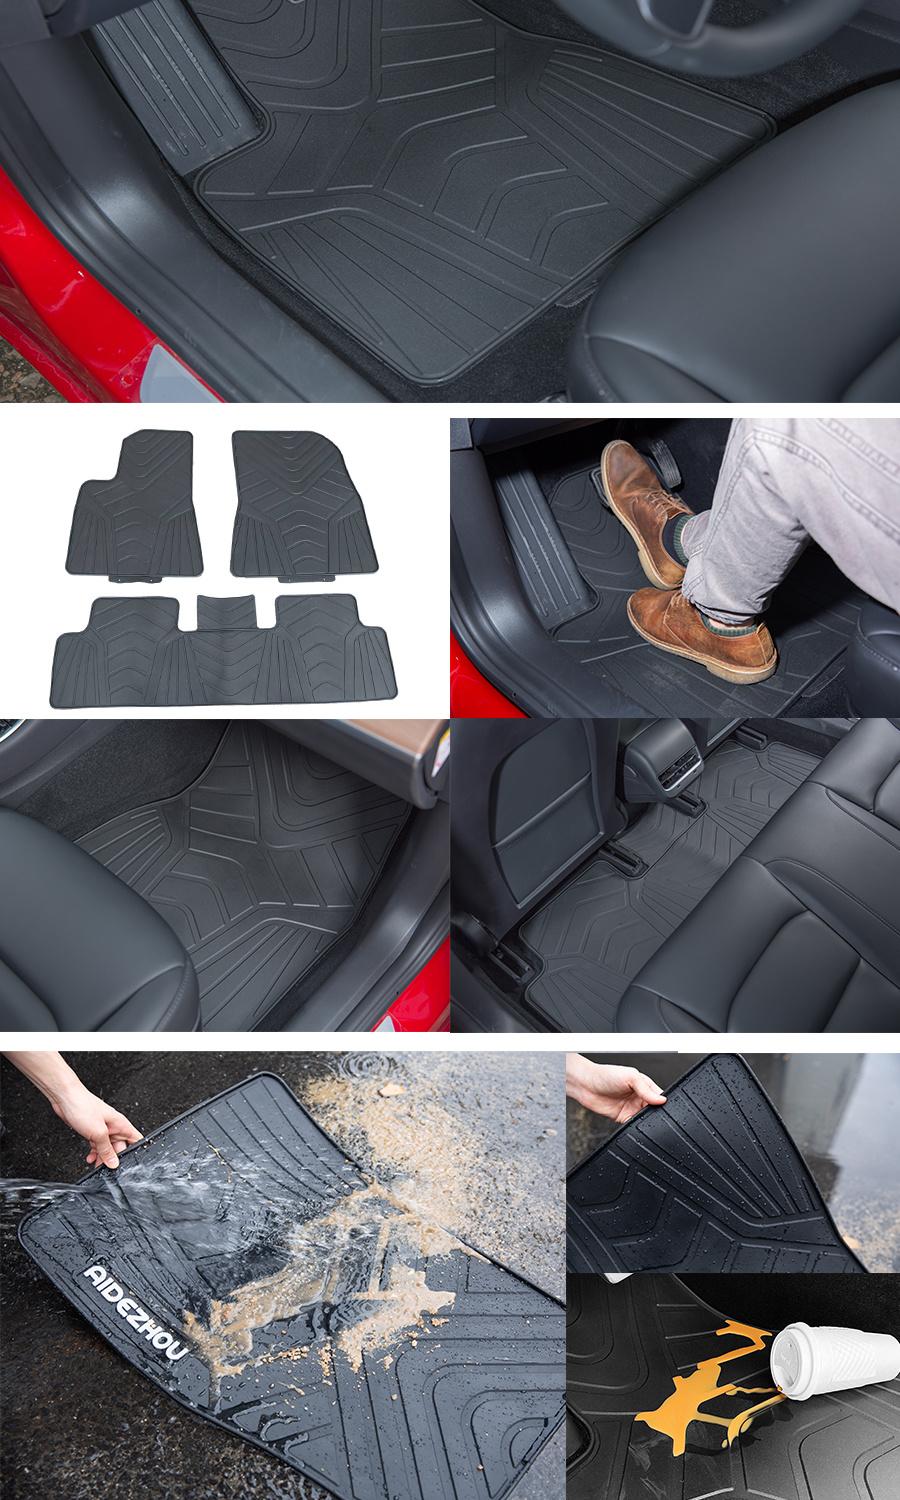 Custom Fit All Weather Car Floor Mats for Ford Fiesta